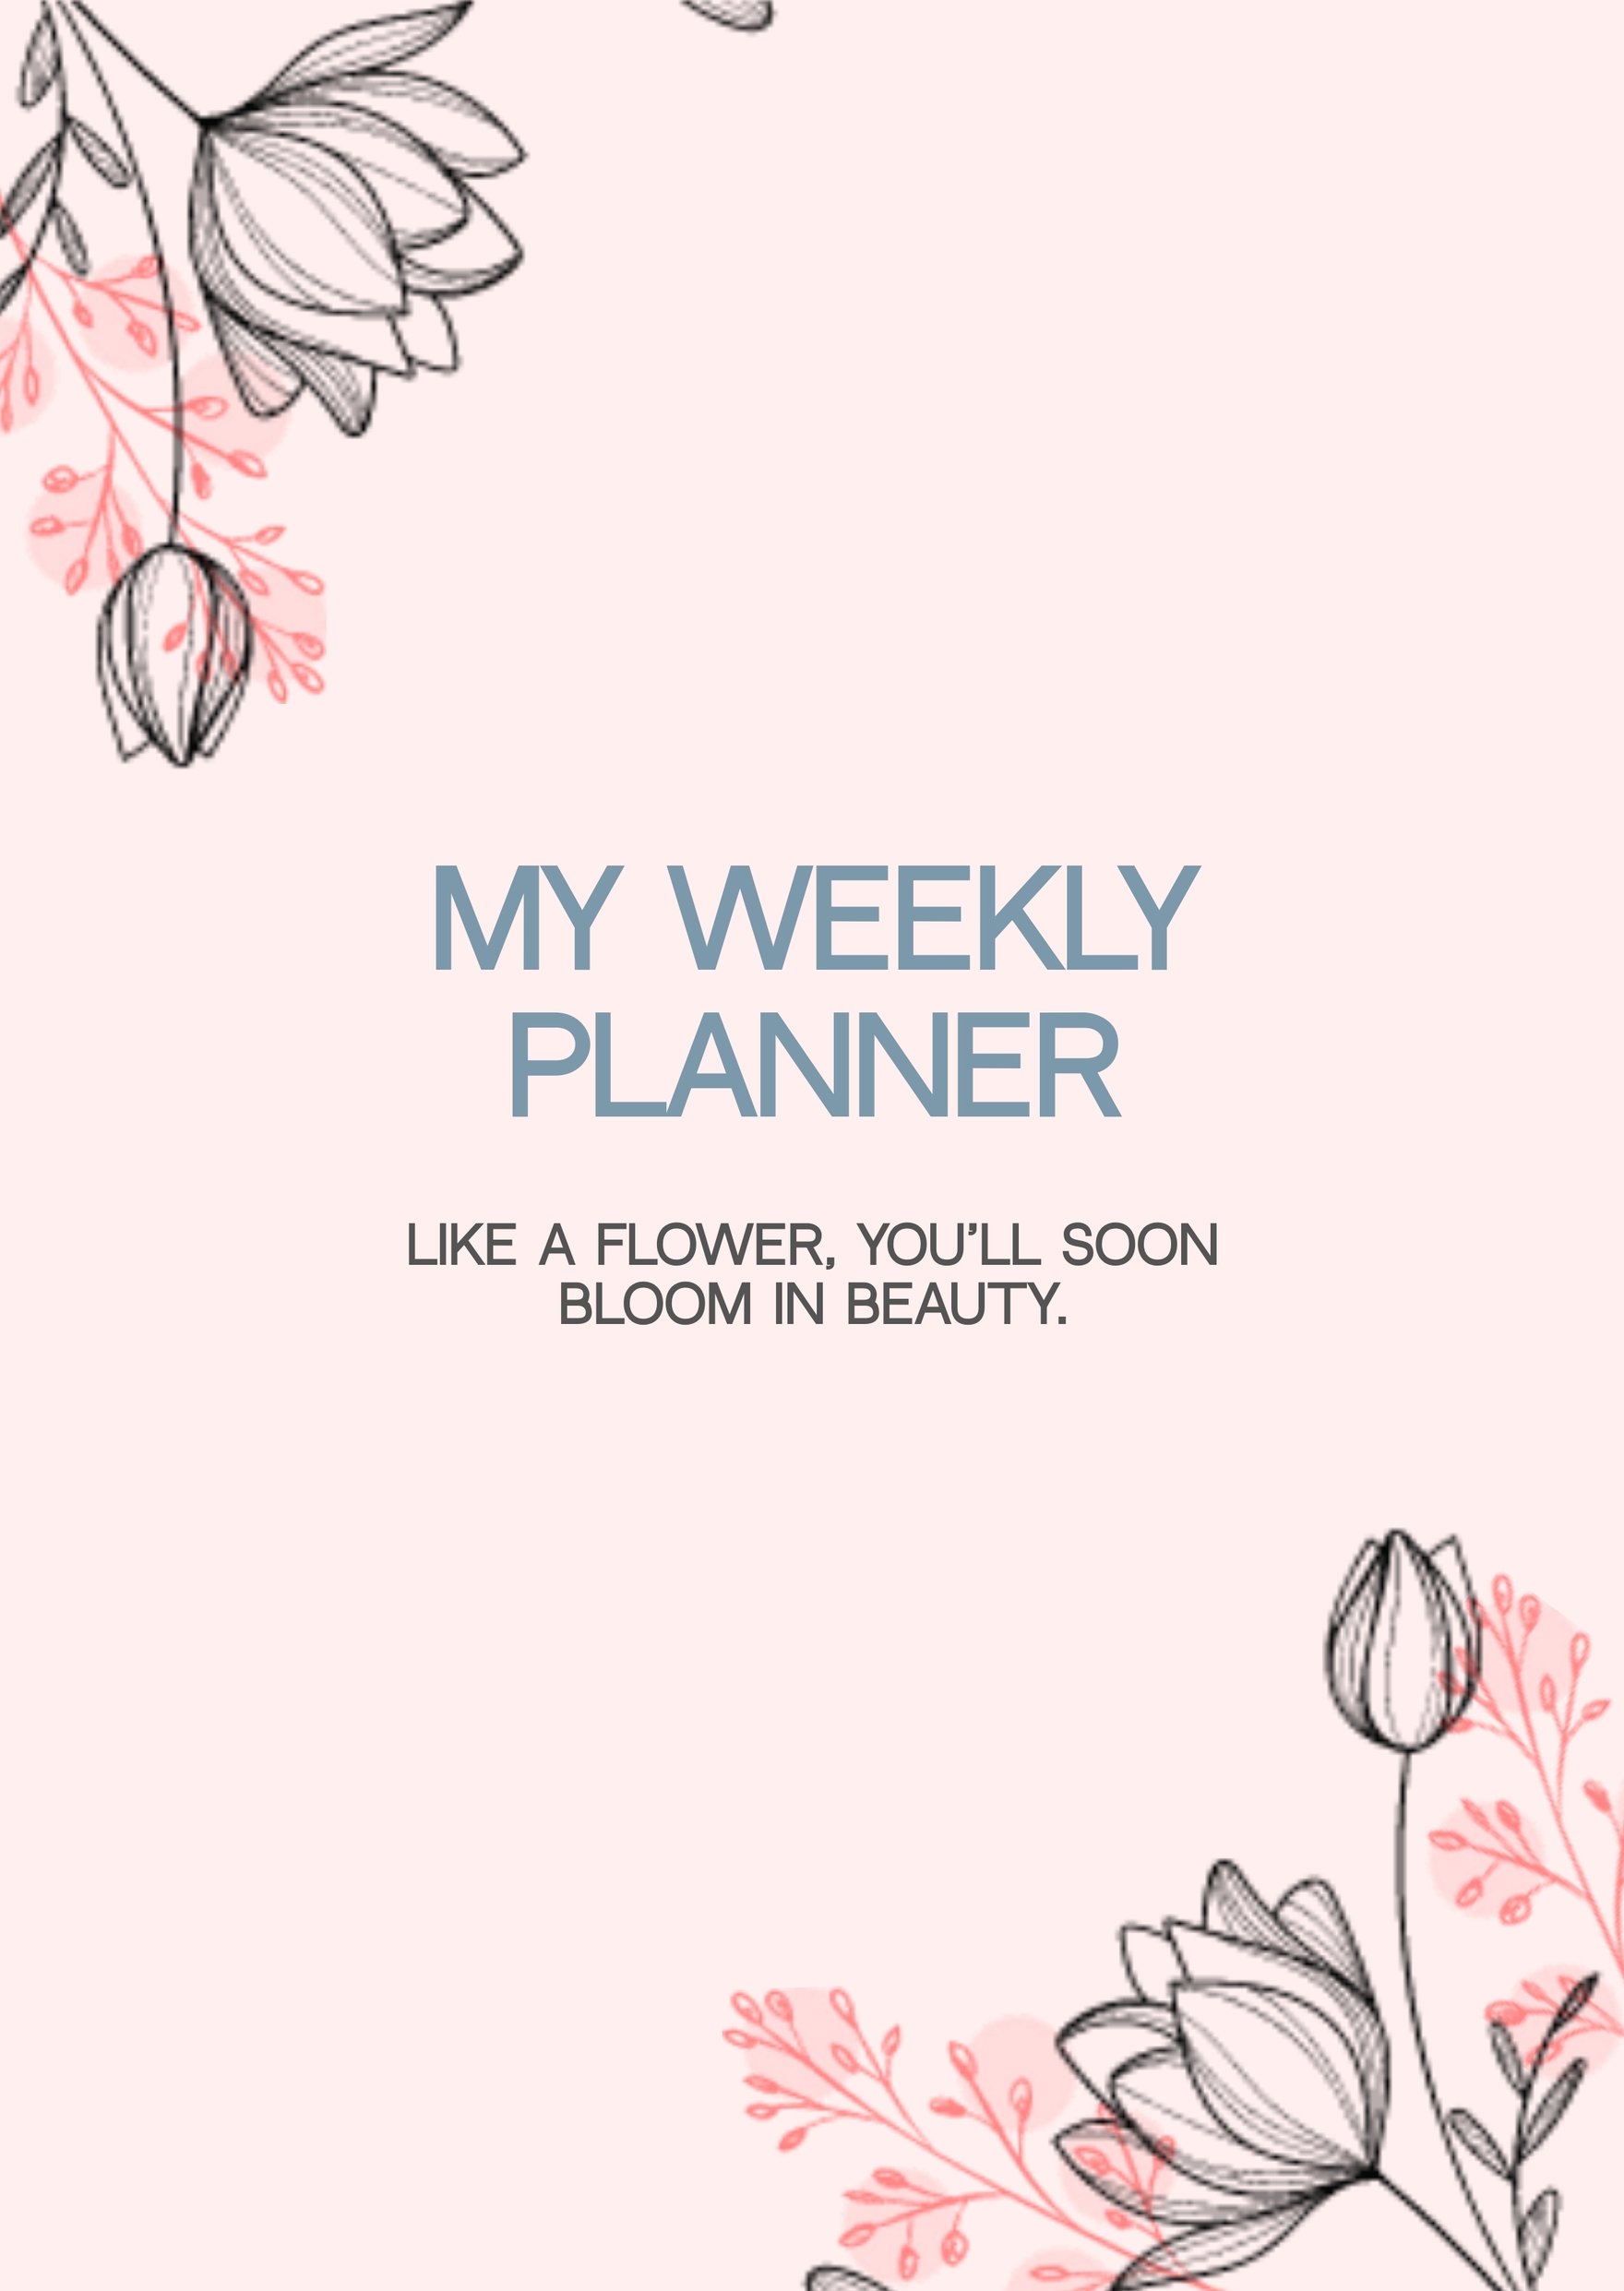 Free Floral Planner Cover Template